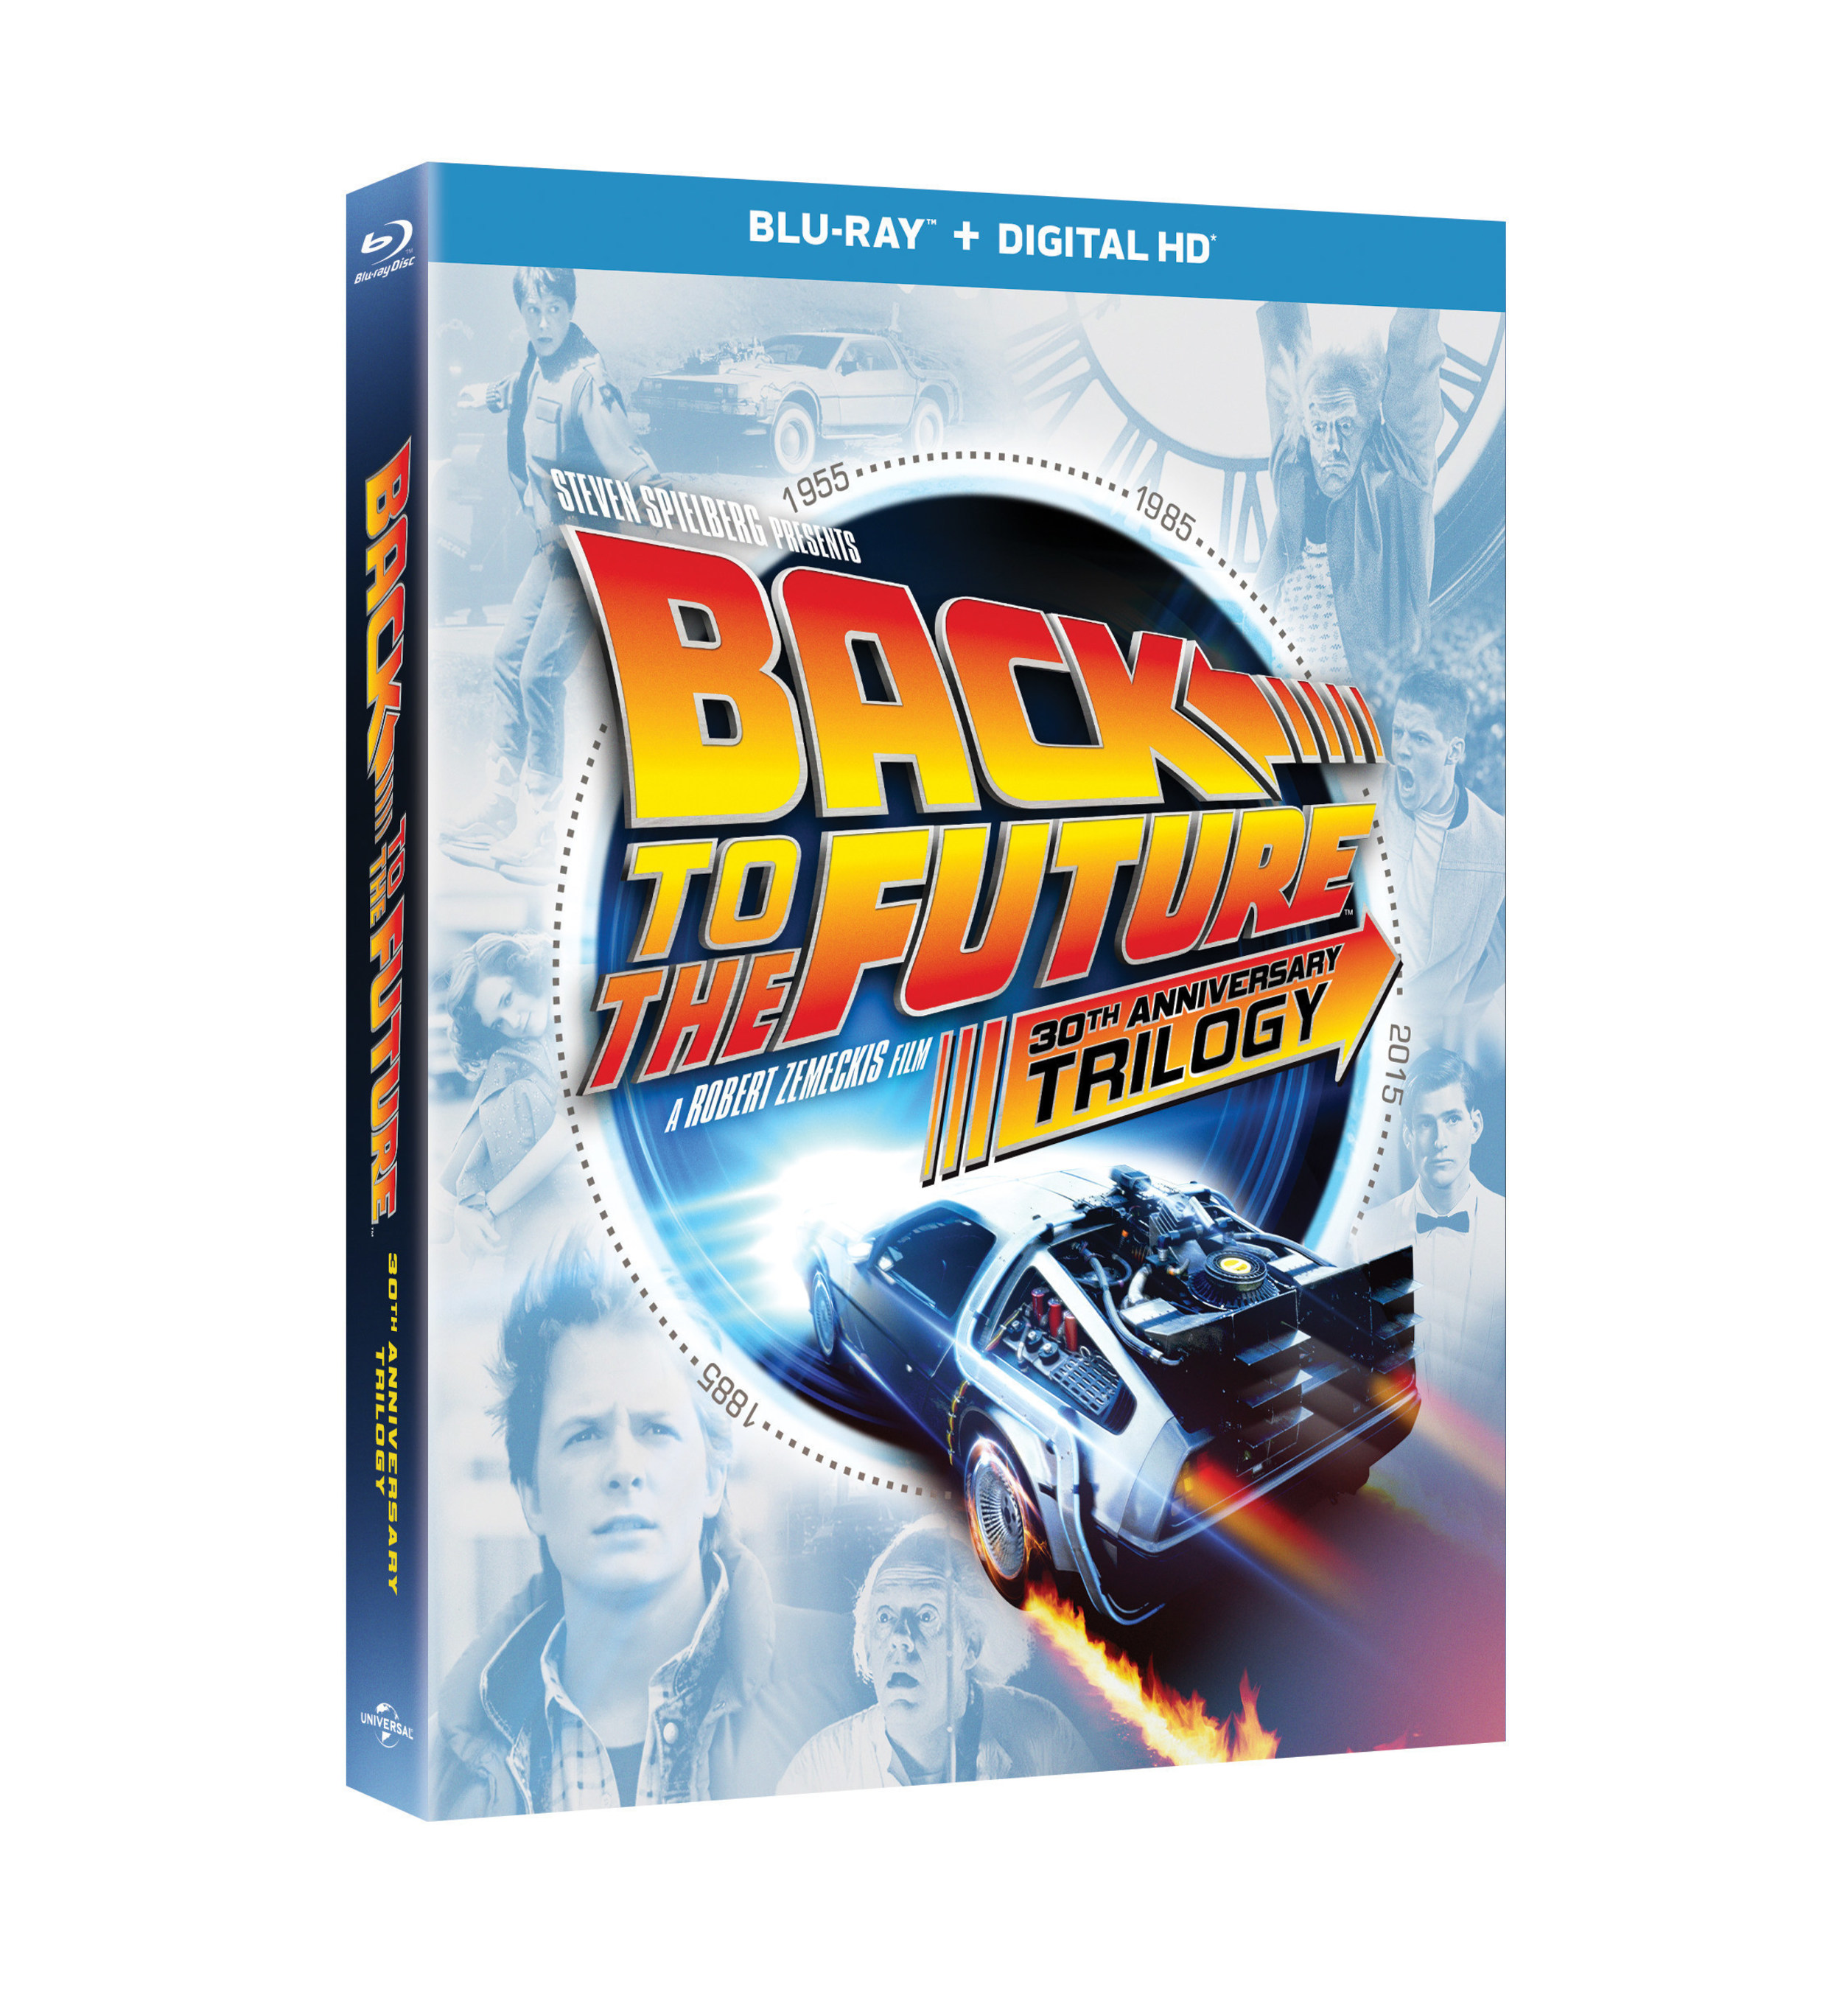 From Universal Pictures Home Entertainment: BACK TO THE FUTURE 30th ANNIVERSARY TRILOGY